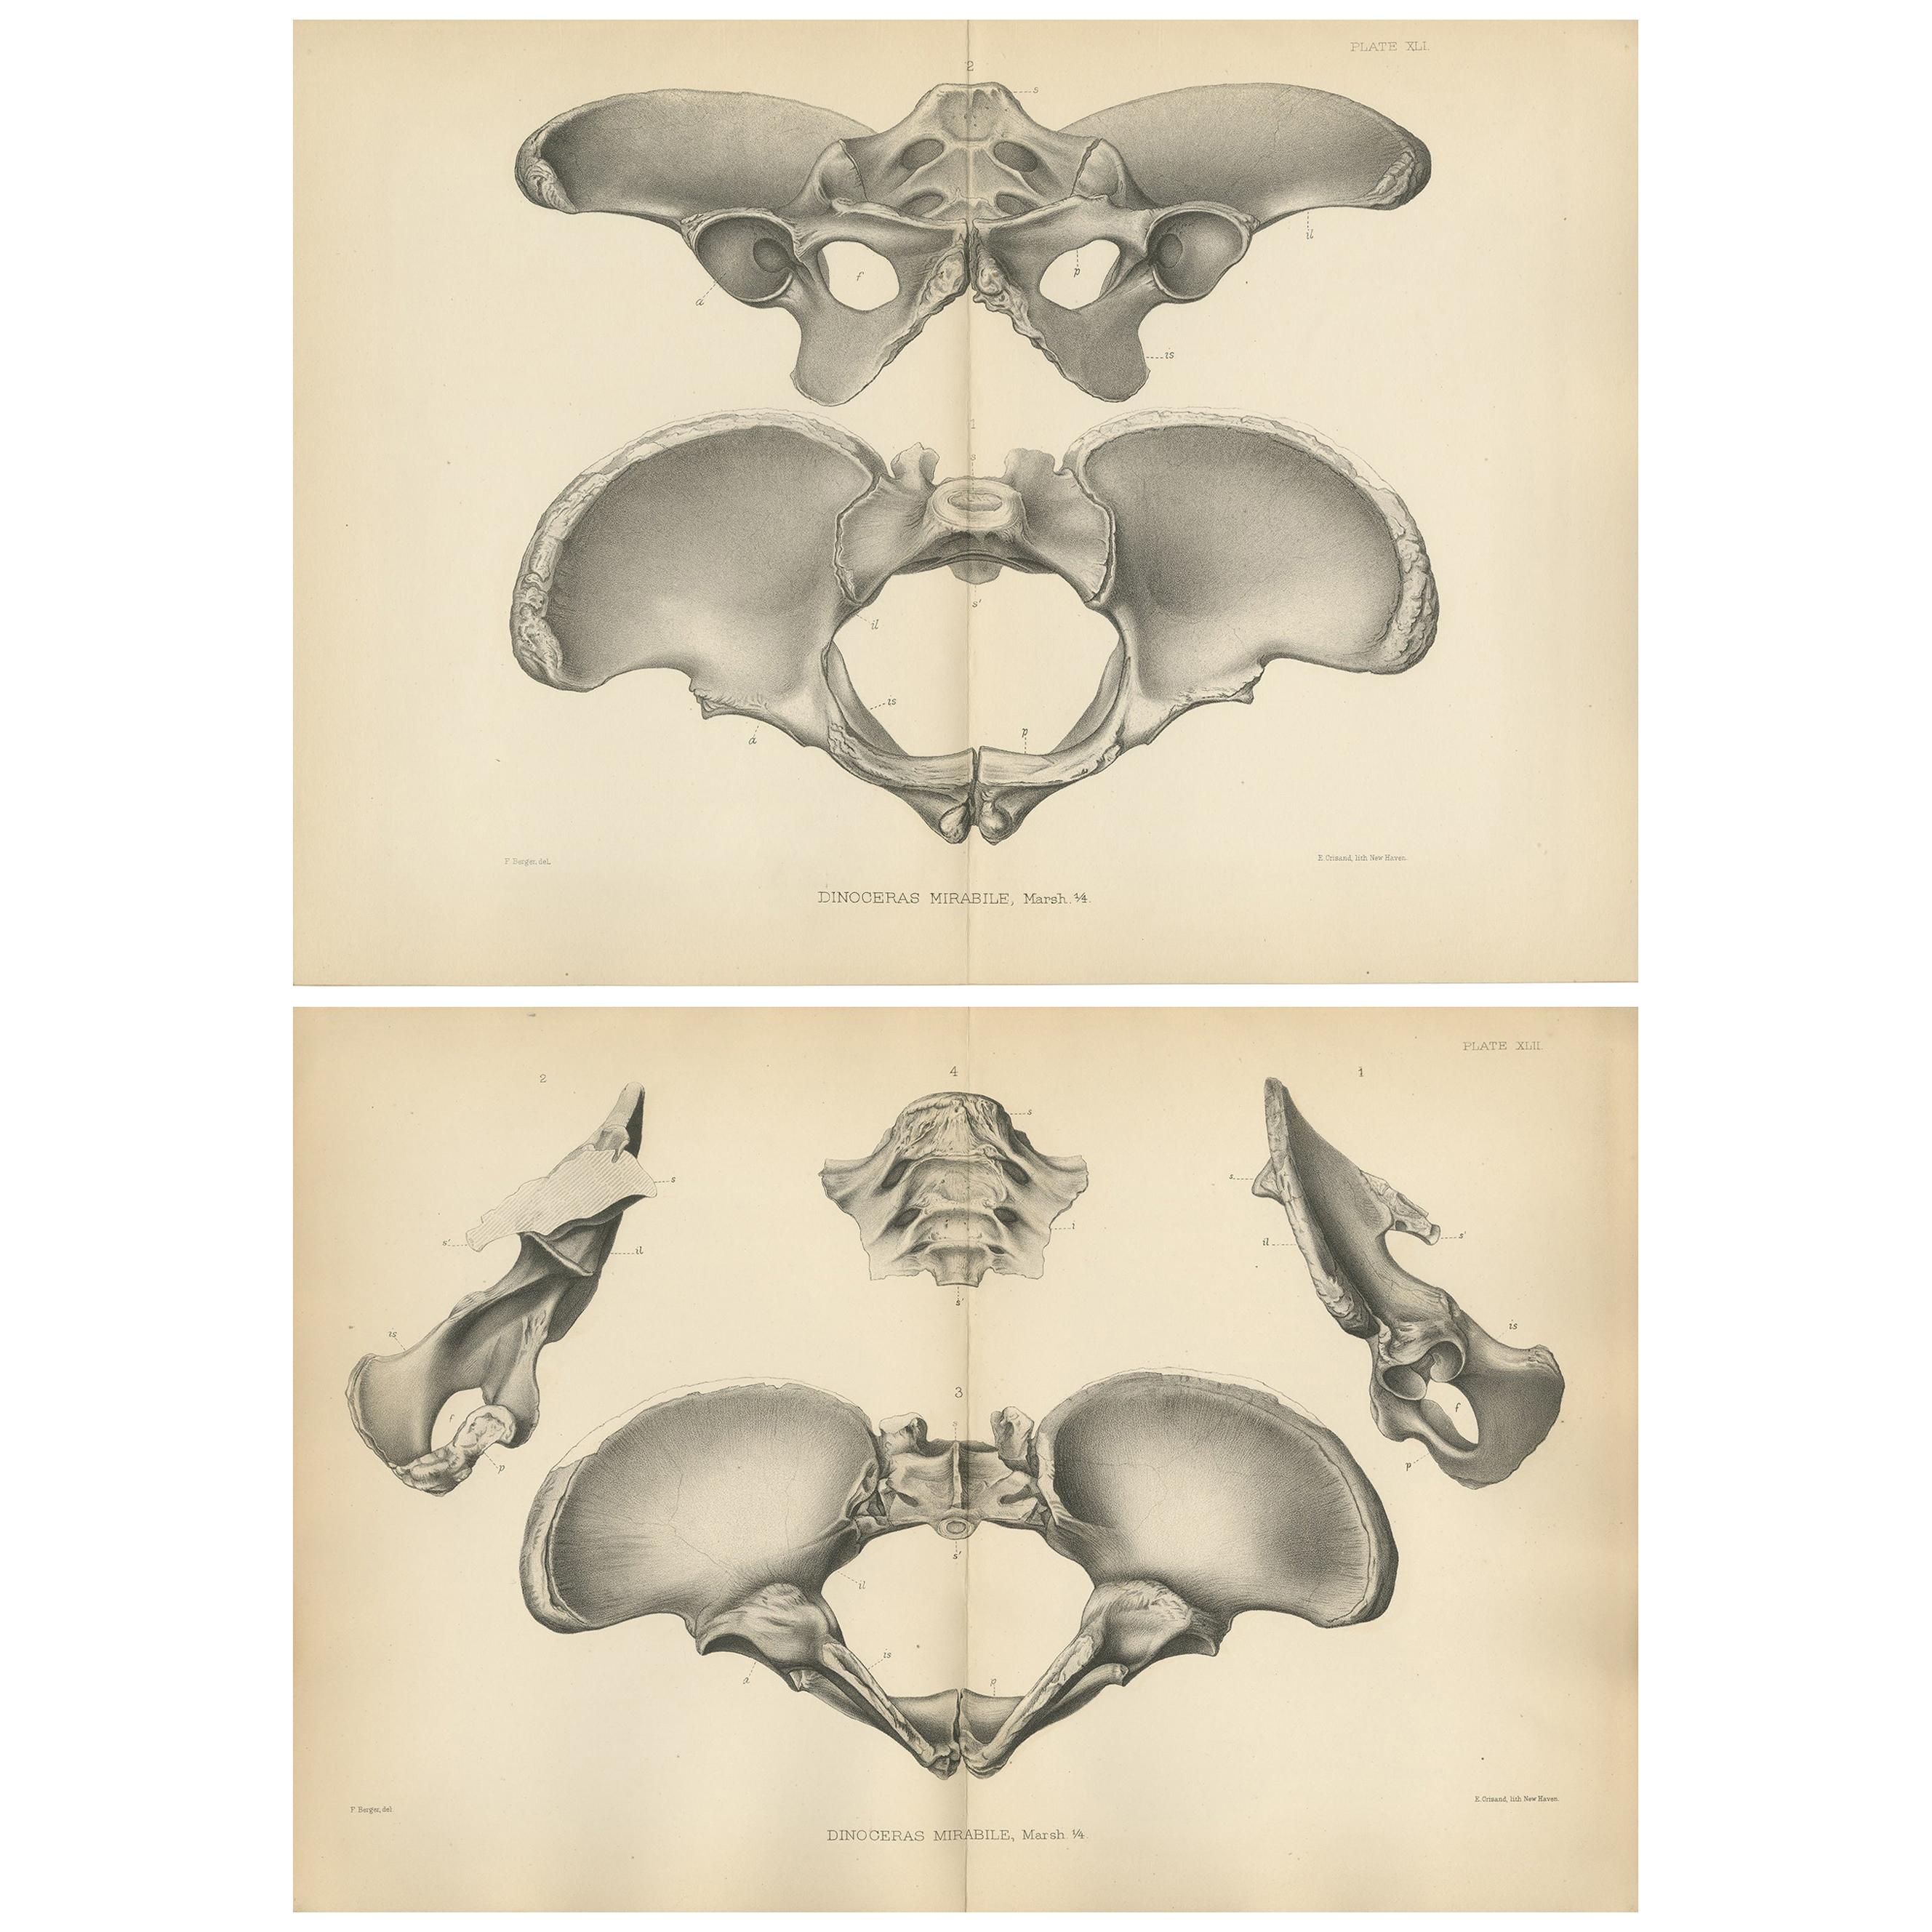 Set of 2 Antique Paleontology Prints of a Dinoceras Mirabile by Marsh, 1886 For Sale